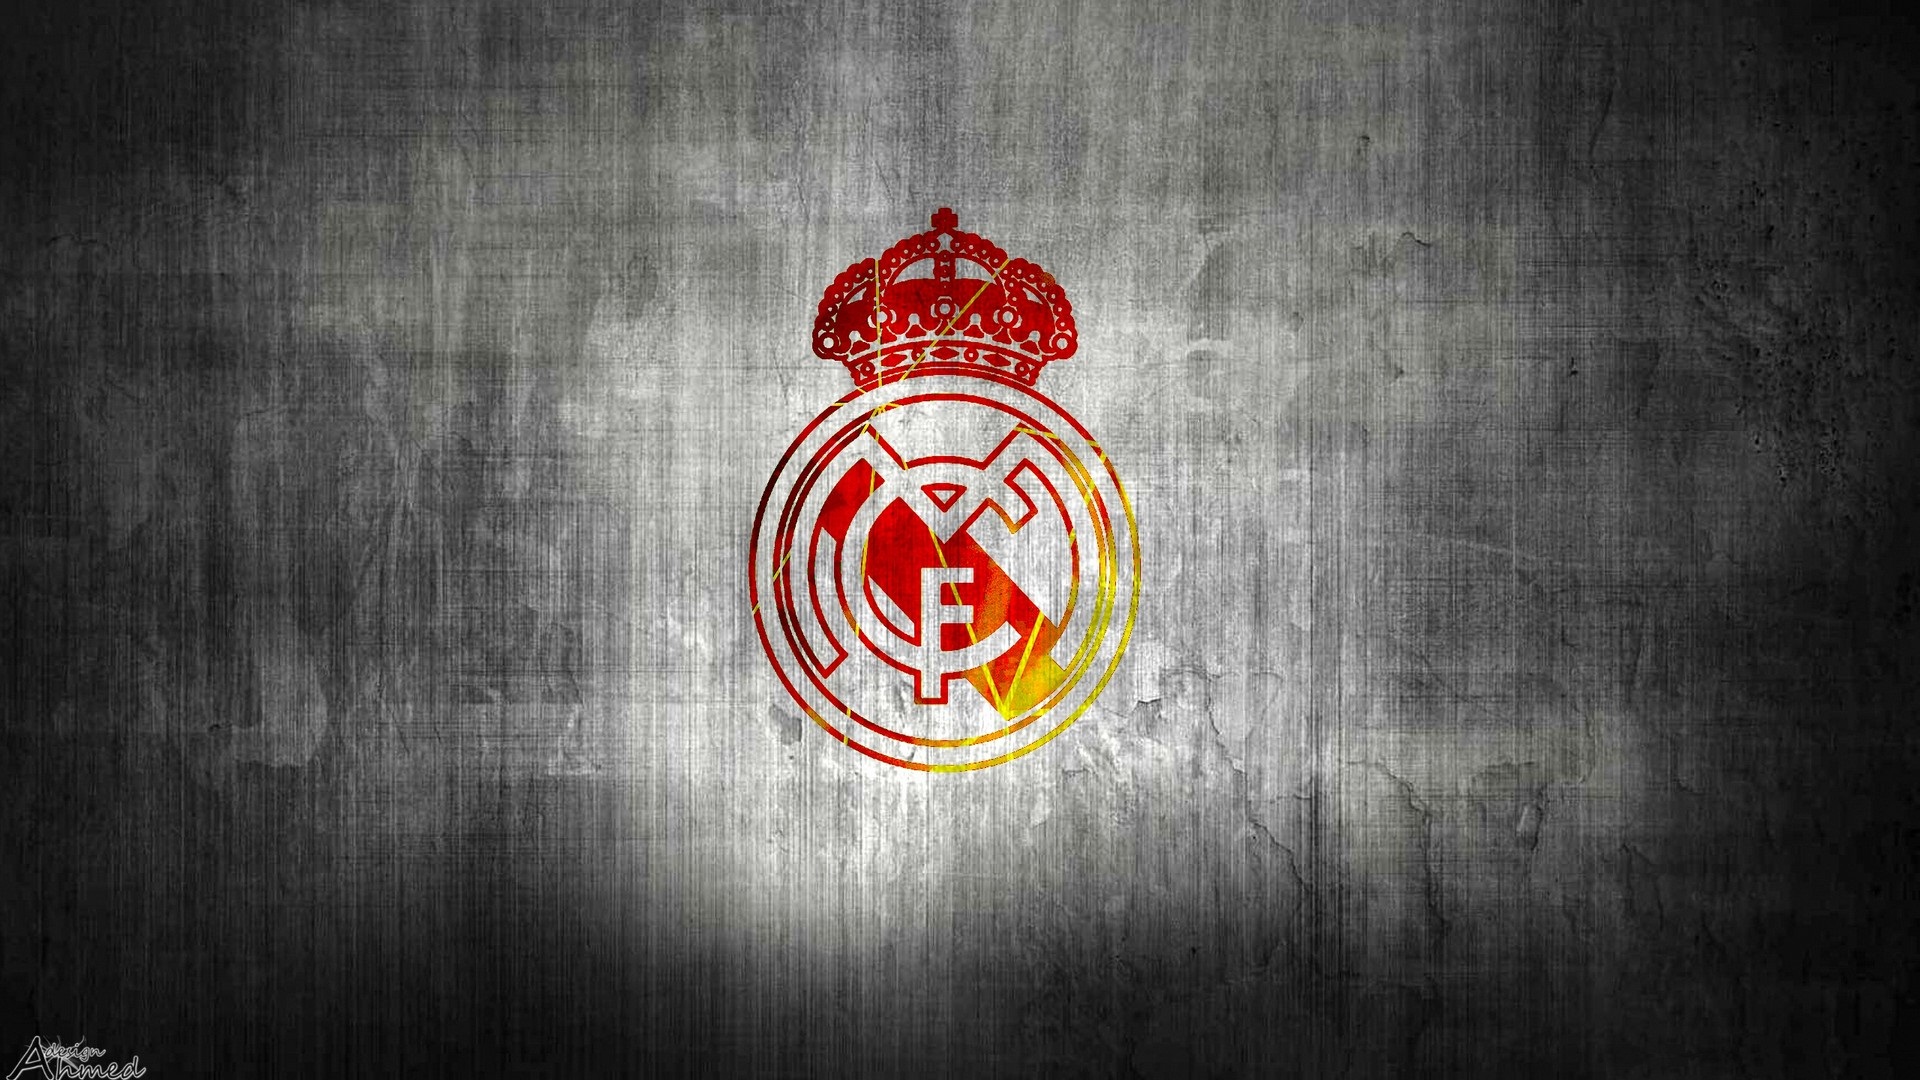 Real Madrid For PC Wallpaper With Resolution 1920X1080 pixel. You can make this wallpaper for your Mac or Windows Desktop Background, iPhone, Android or Tablet and another Smartphone device for free